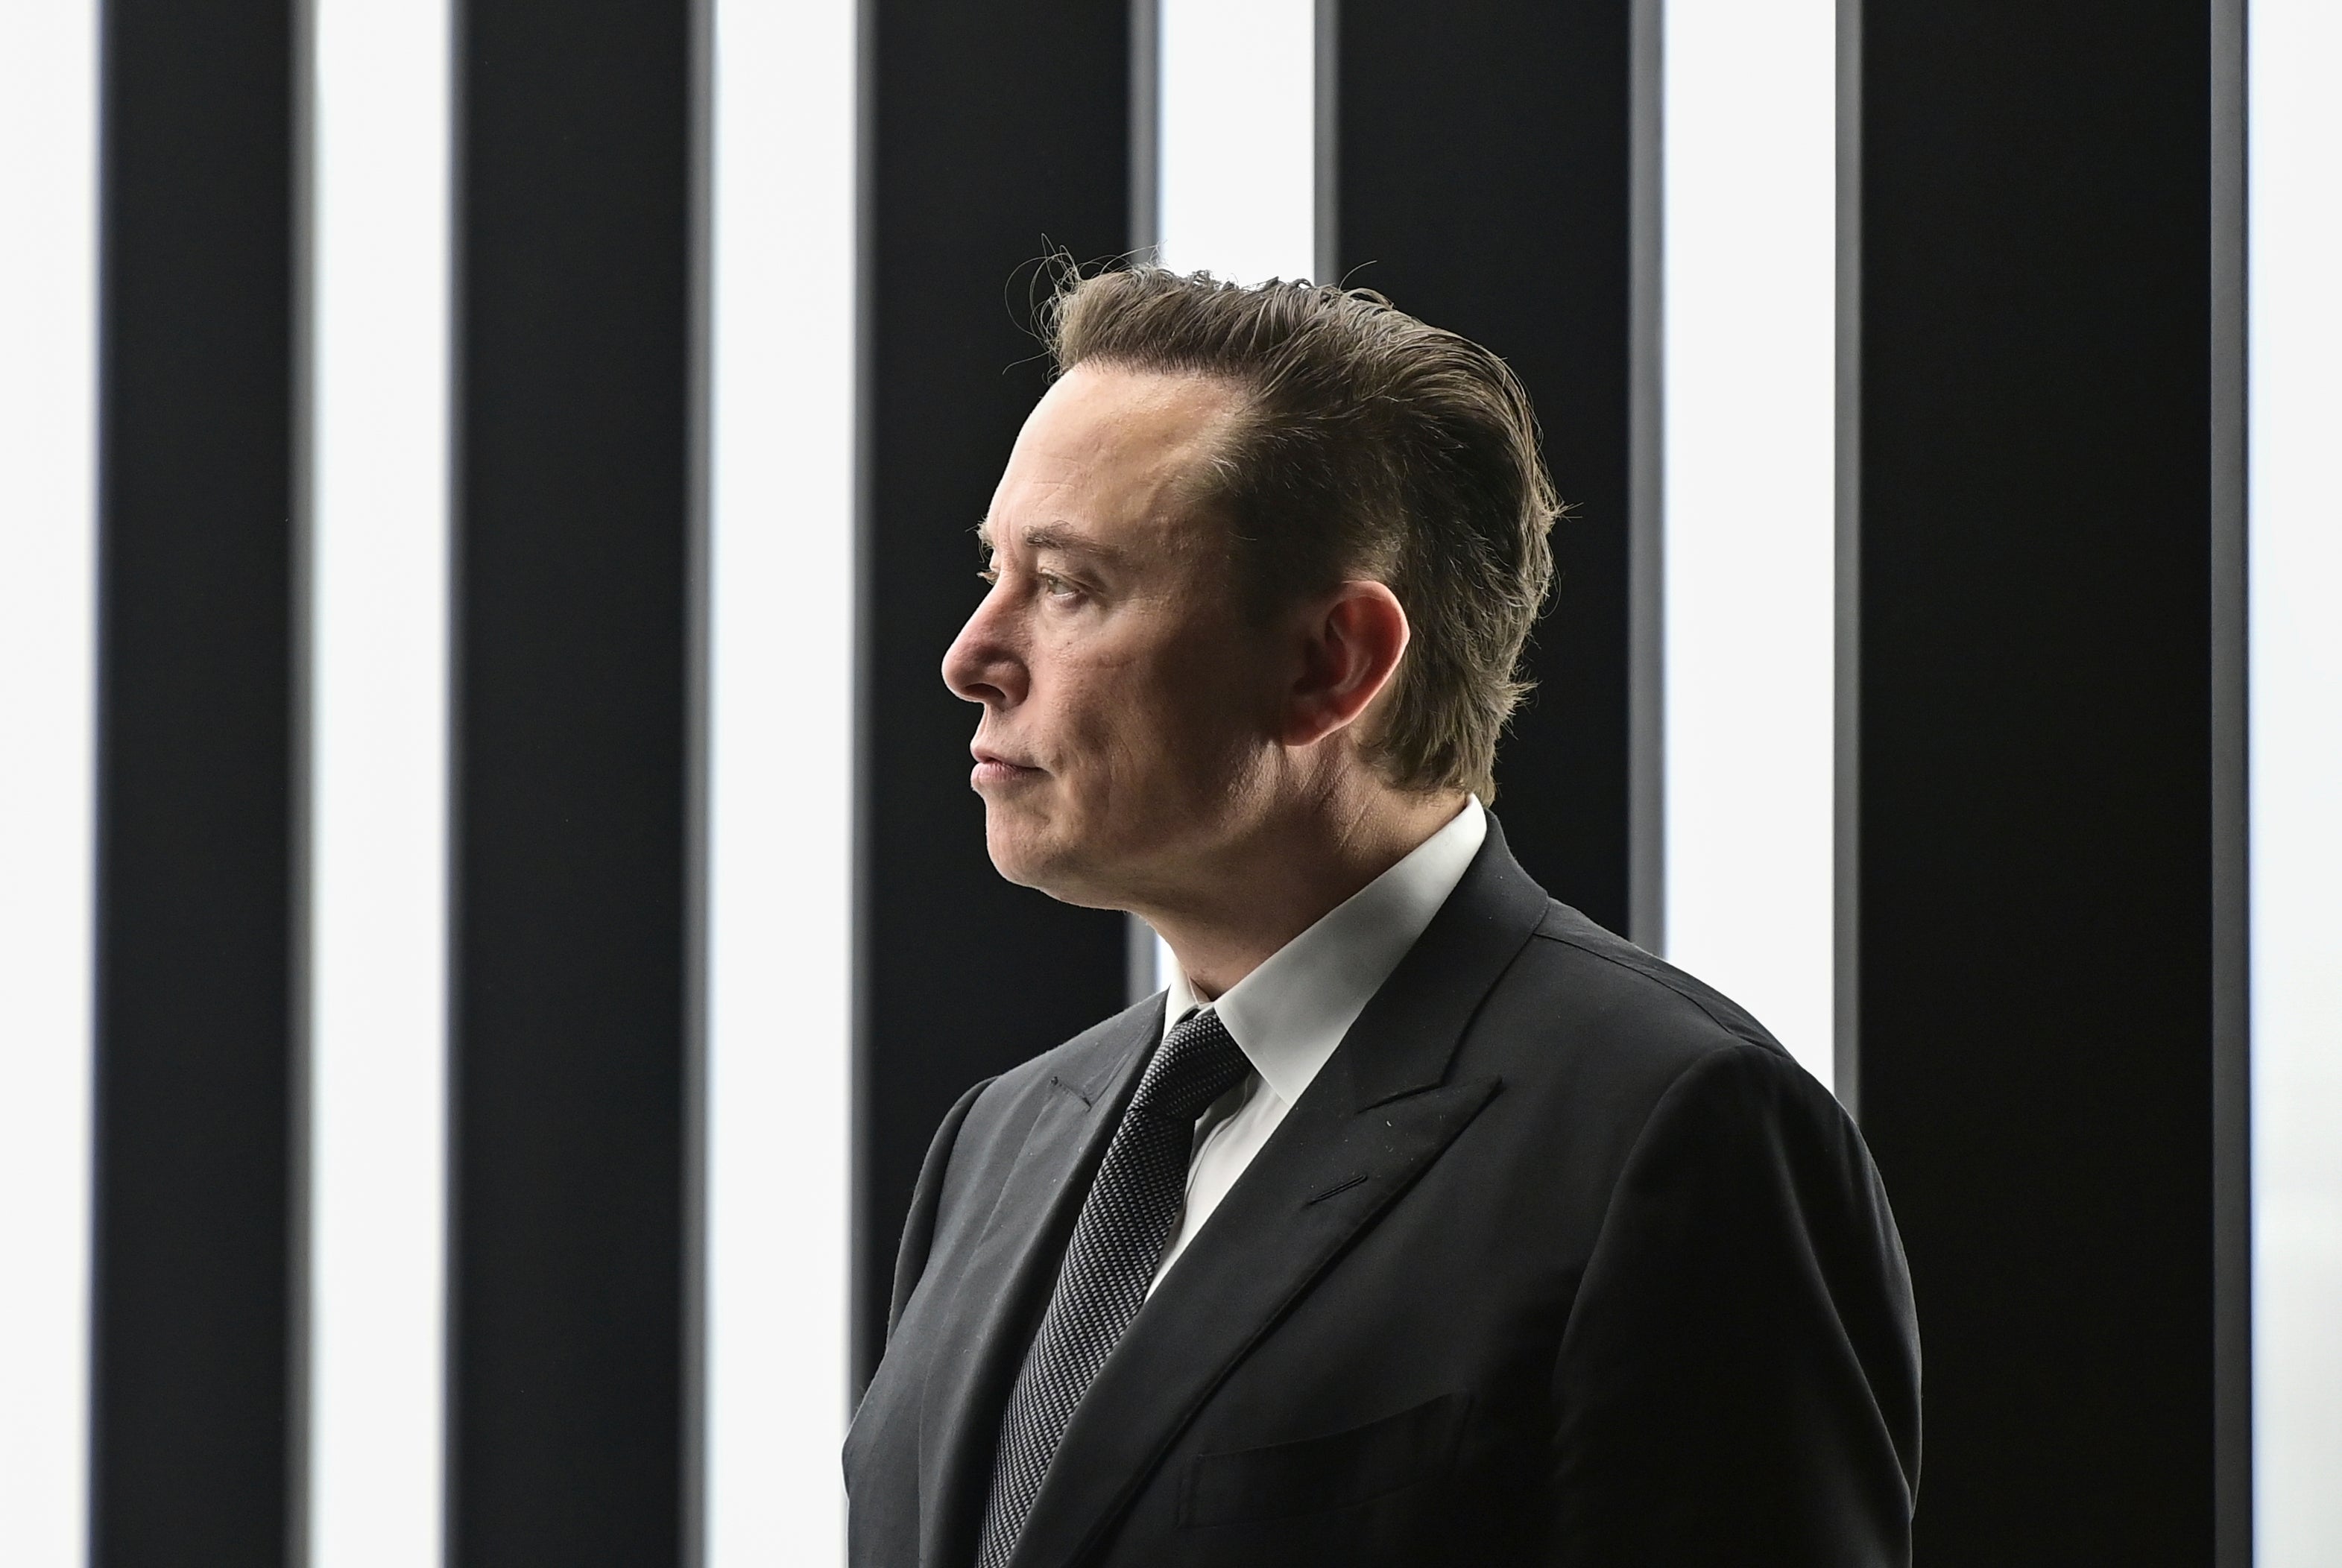 Elon Musk’s takeover of Twitter has divided opinion